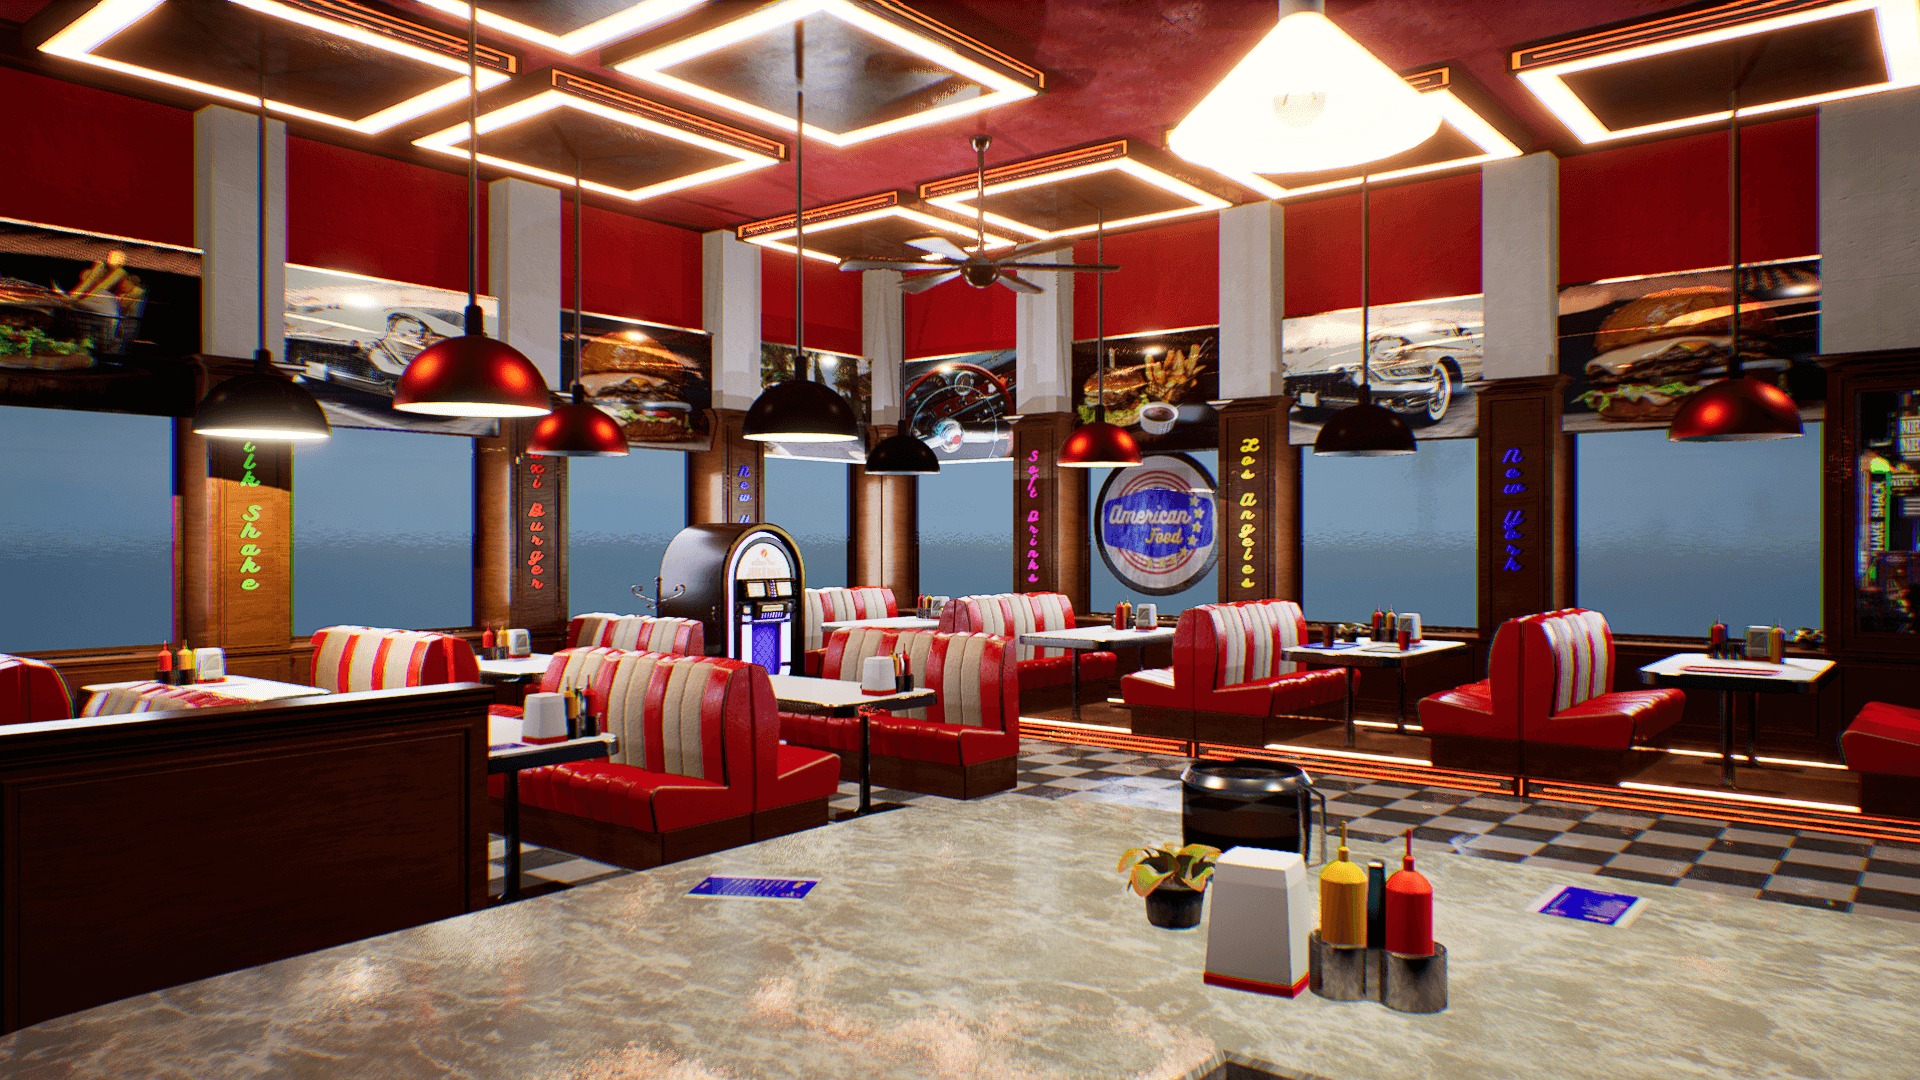 An image showing American Food Restaurant asset pack, created with Unreal Engine.